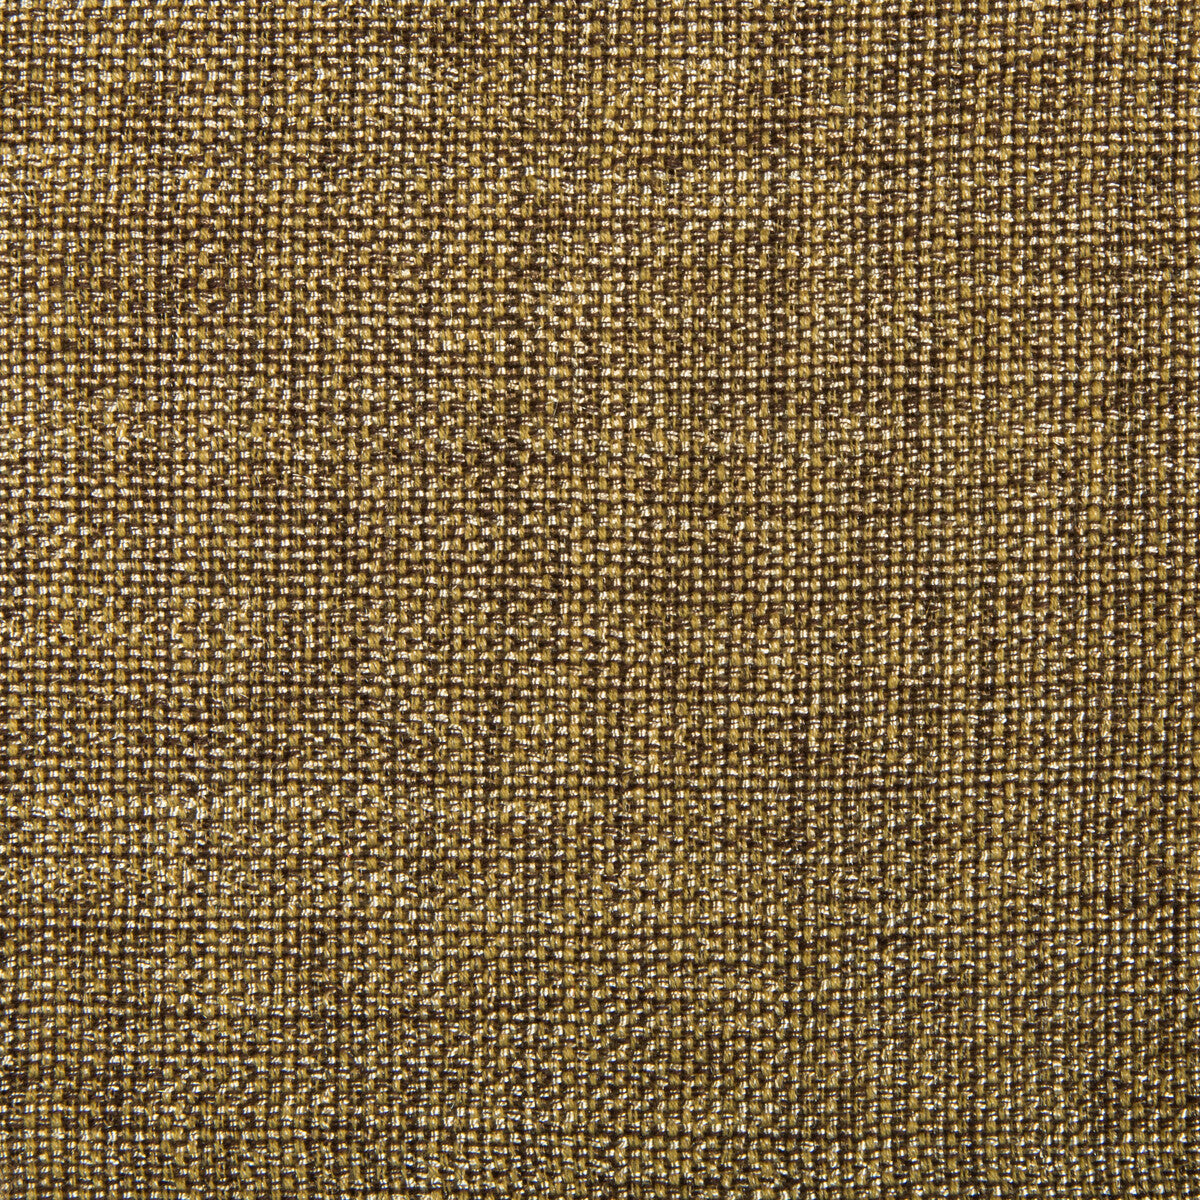 Kravet Contract fabric in 4458-614 color - pattern 4458.614.0 - by Kravet Contract